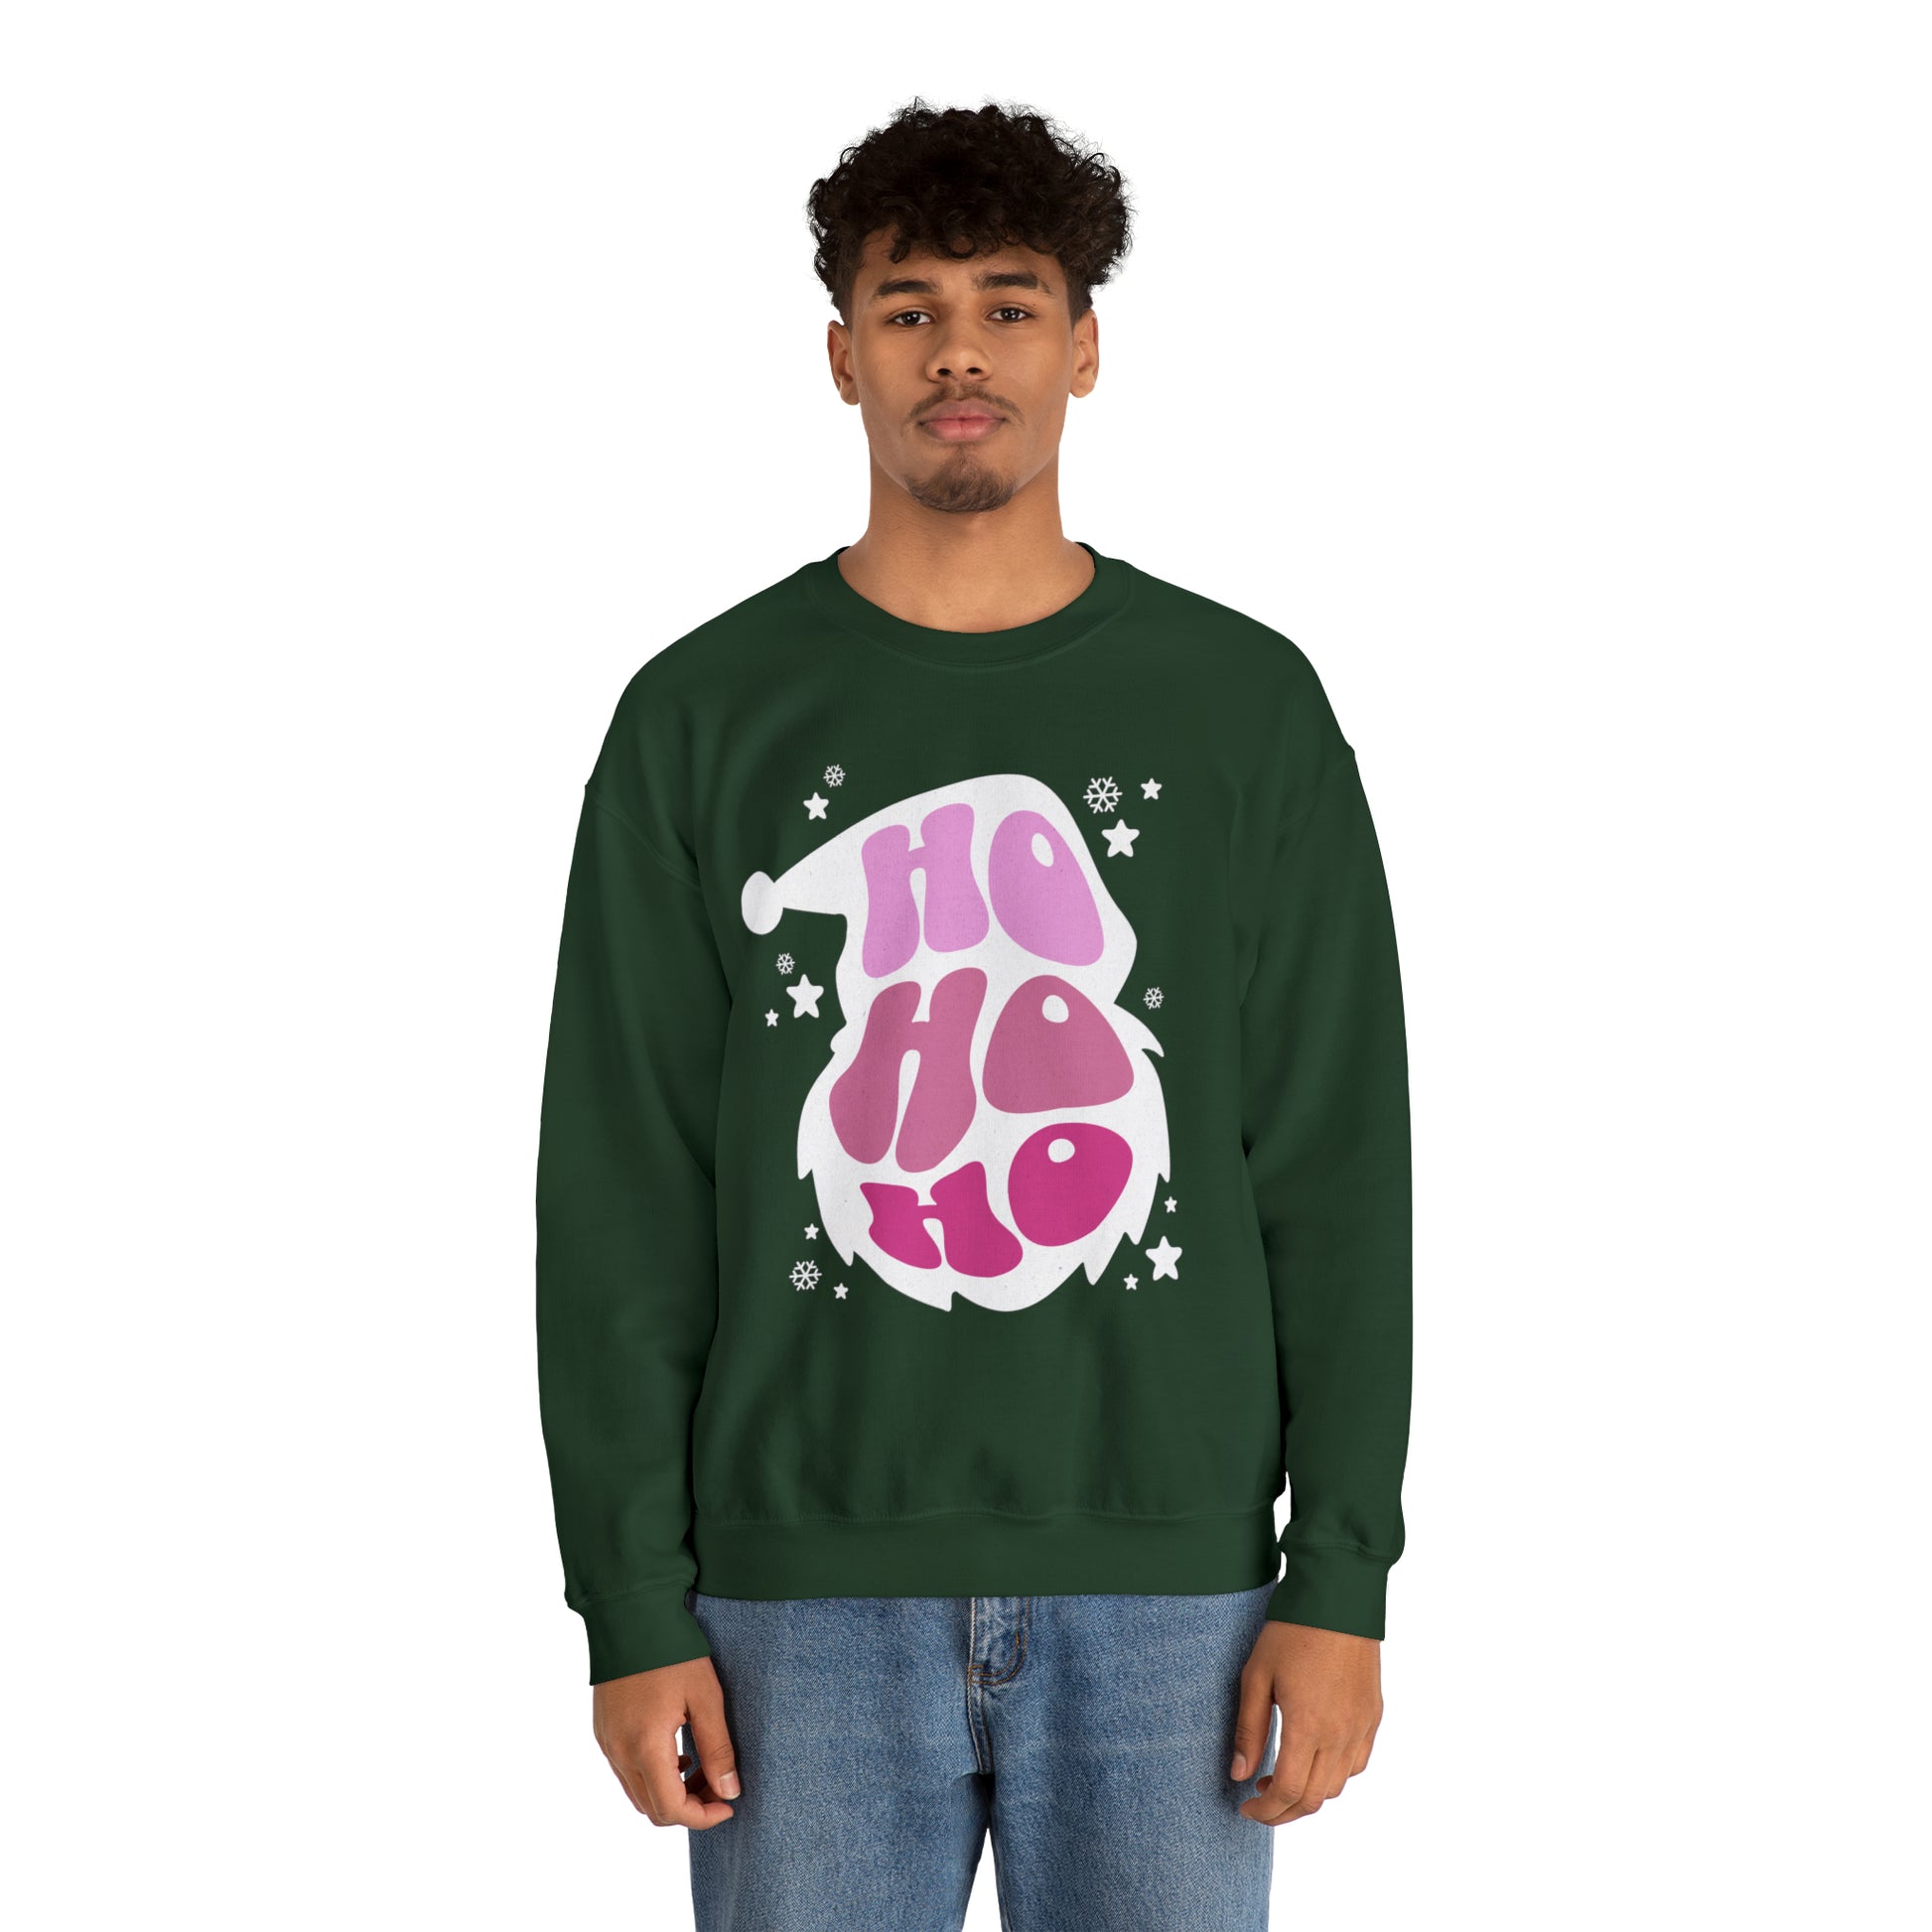 A man wearing a comfortable green sweatshirt with the Printify Ho Ho Ho Santa Outline Pink Holiday Sweatshirt - Cozy Crewneck - Festive Christmas Sweater on it, showcasing his unique style.